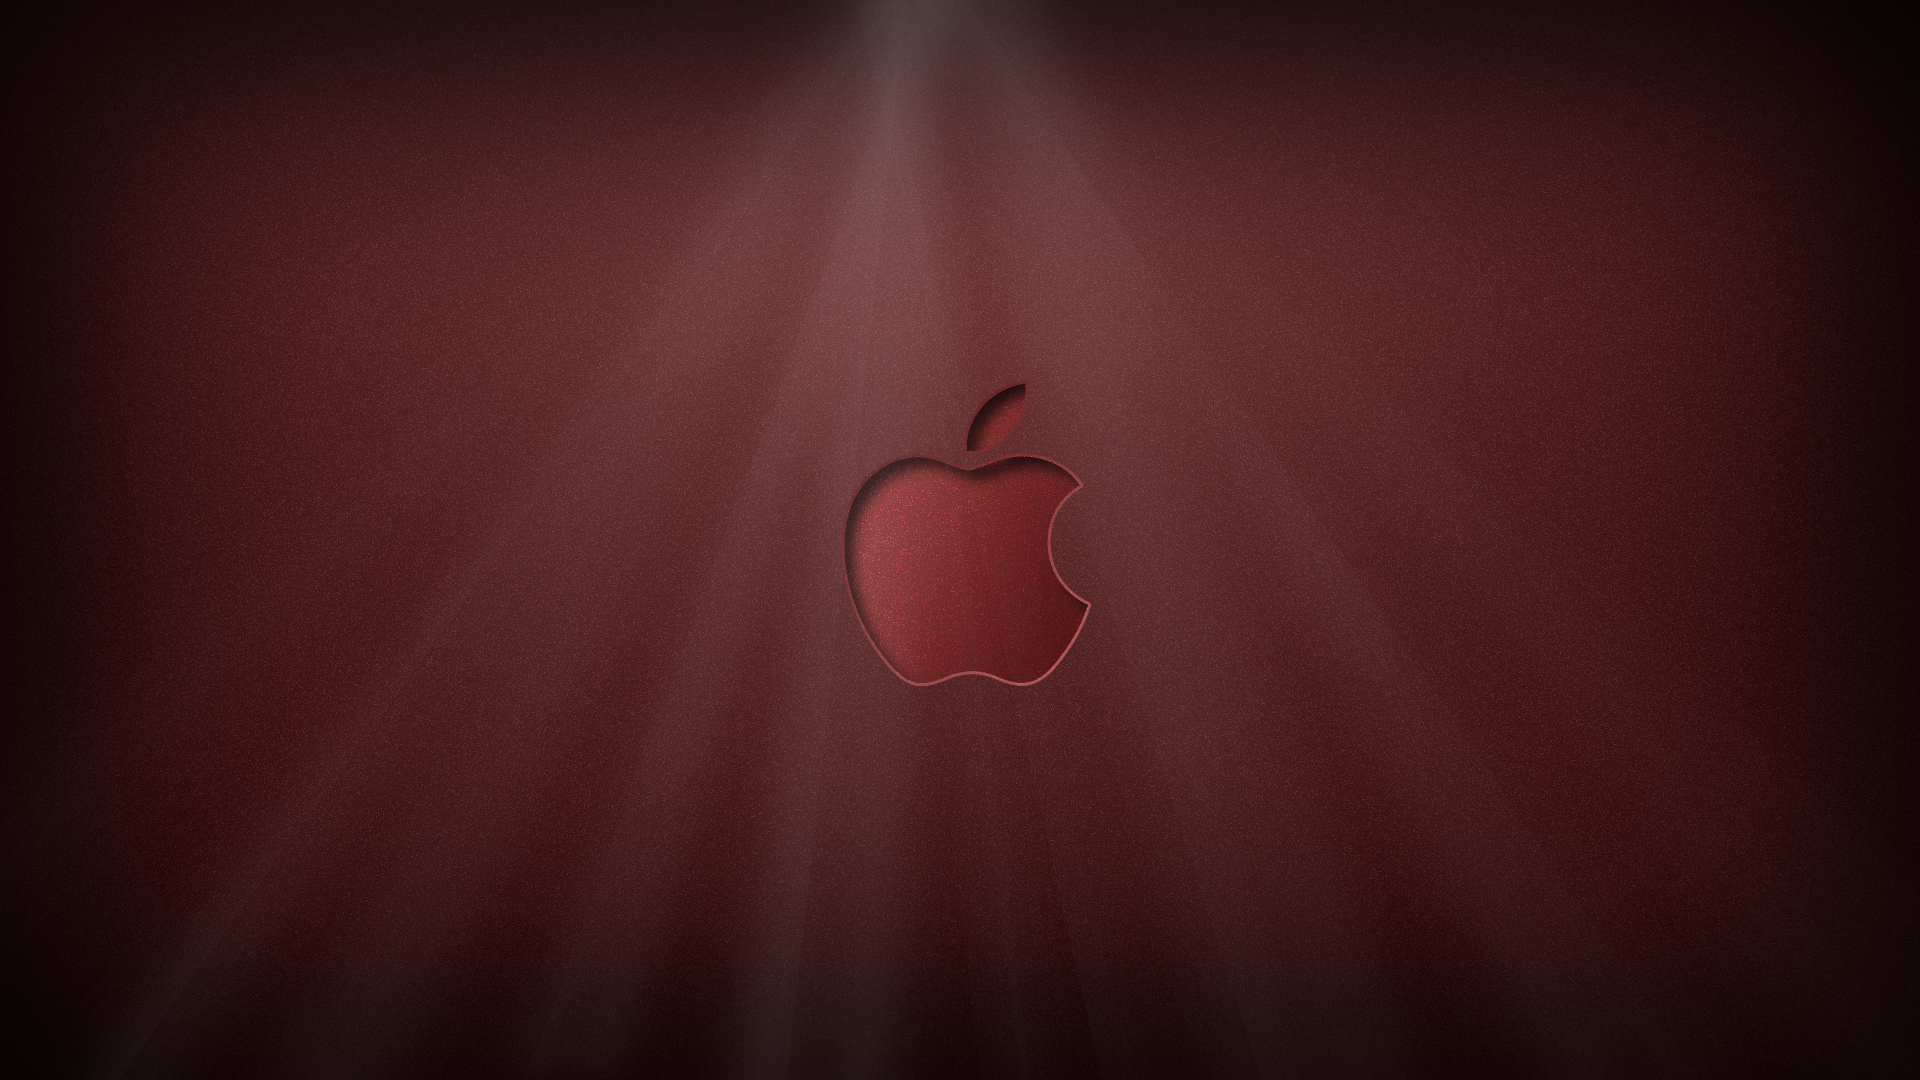 Red Apple Logo Wallpaper Apple logo shiny red by